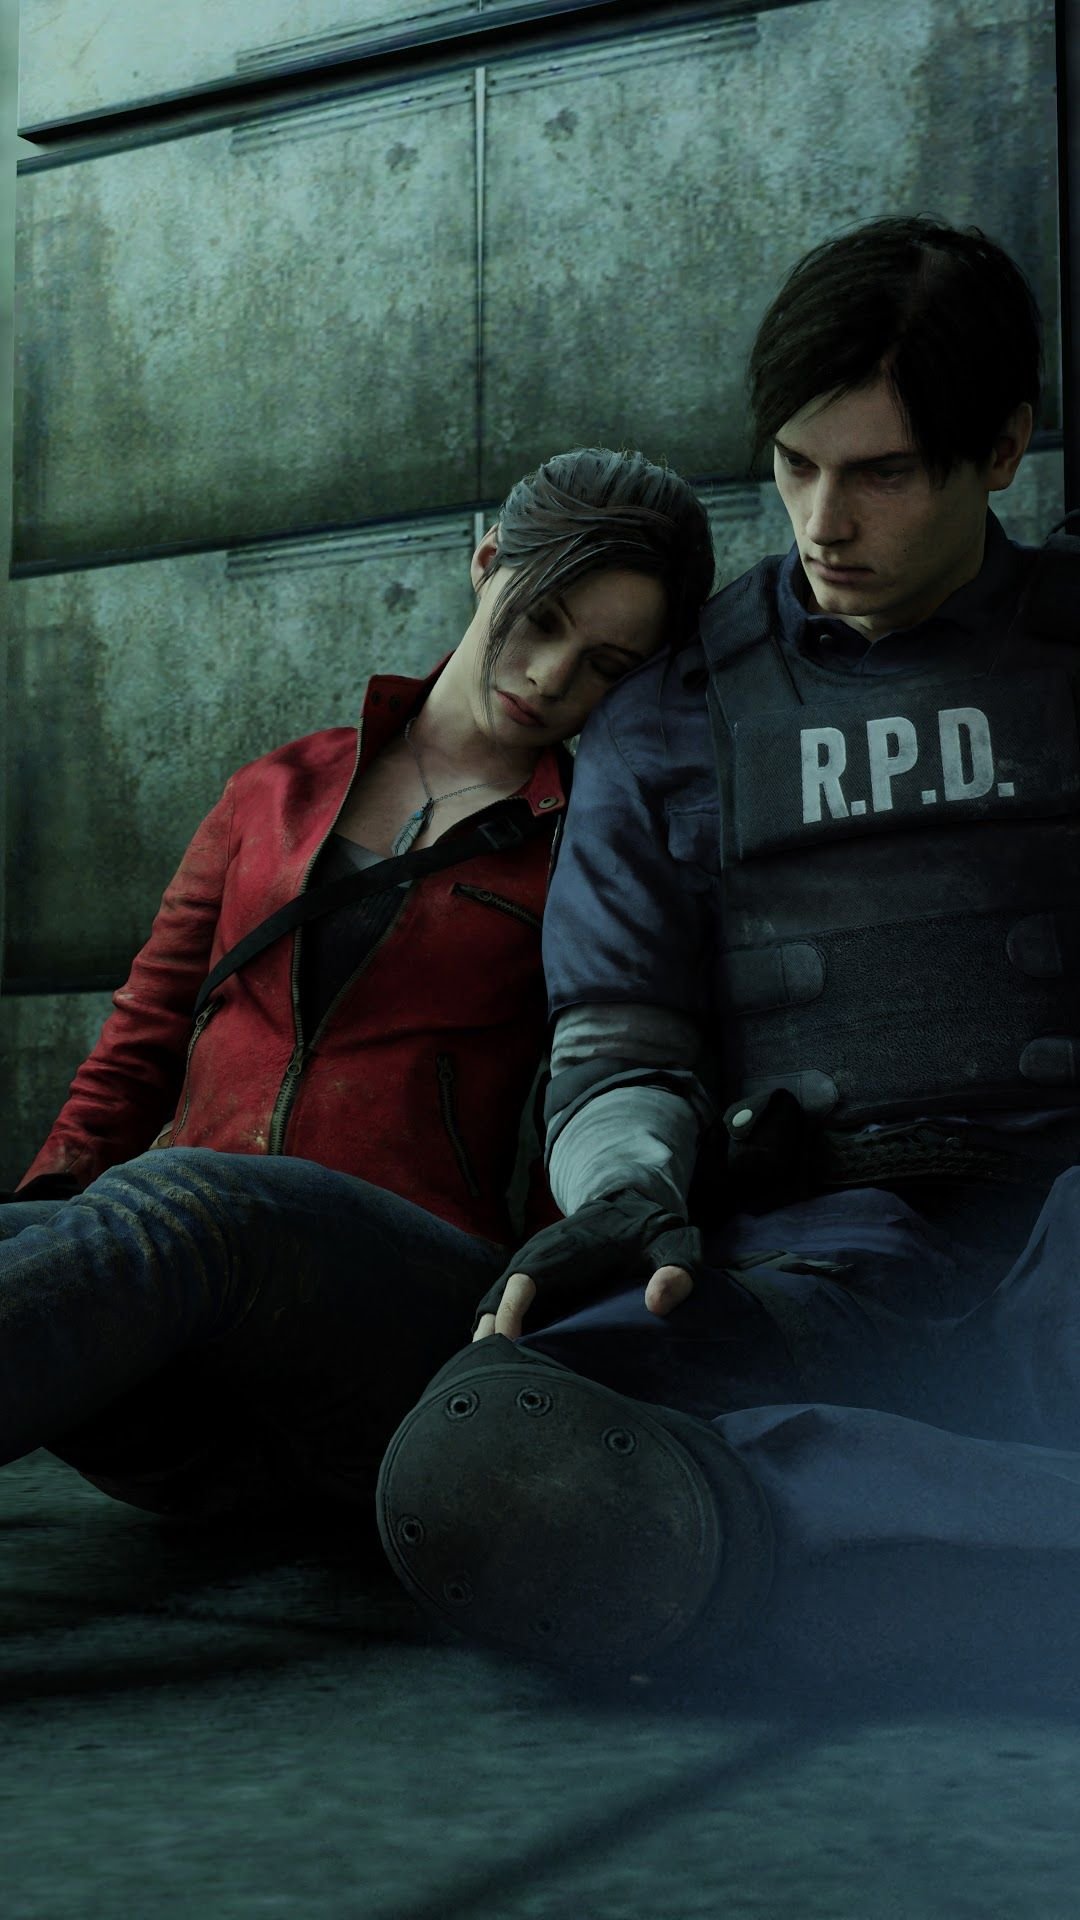 Leon Kennedy Resident Evil 2 2019 4k HD Games 4k Wallpapers Images  Backgrounds Photos and Pictures